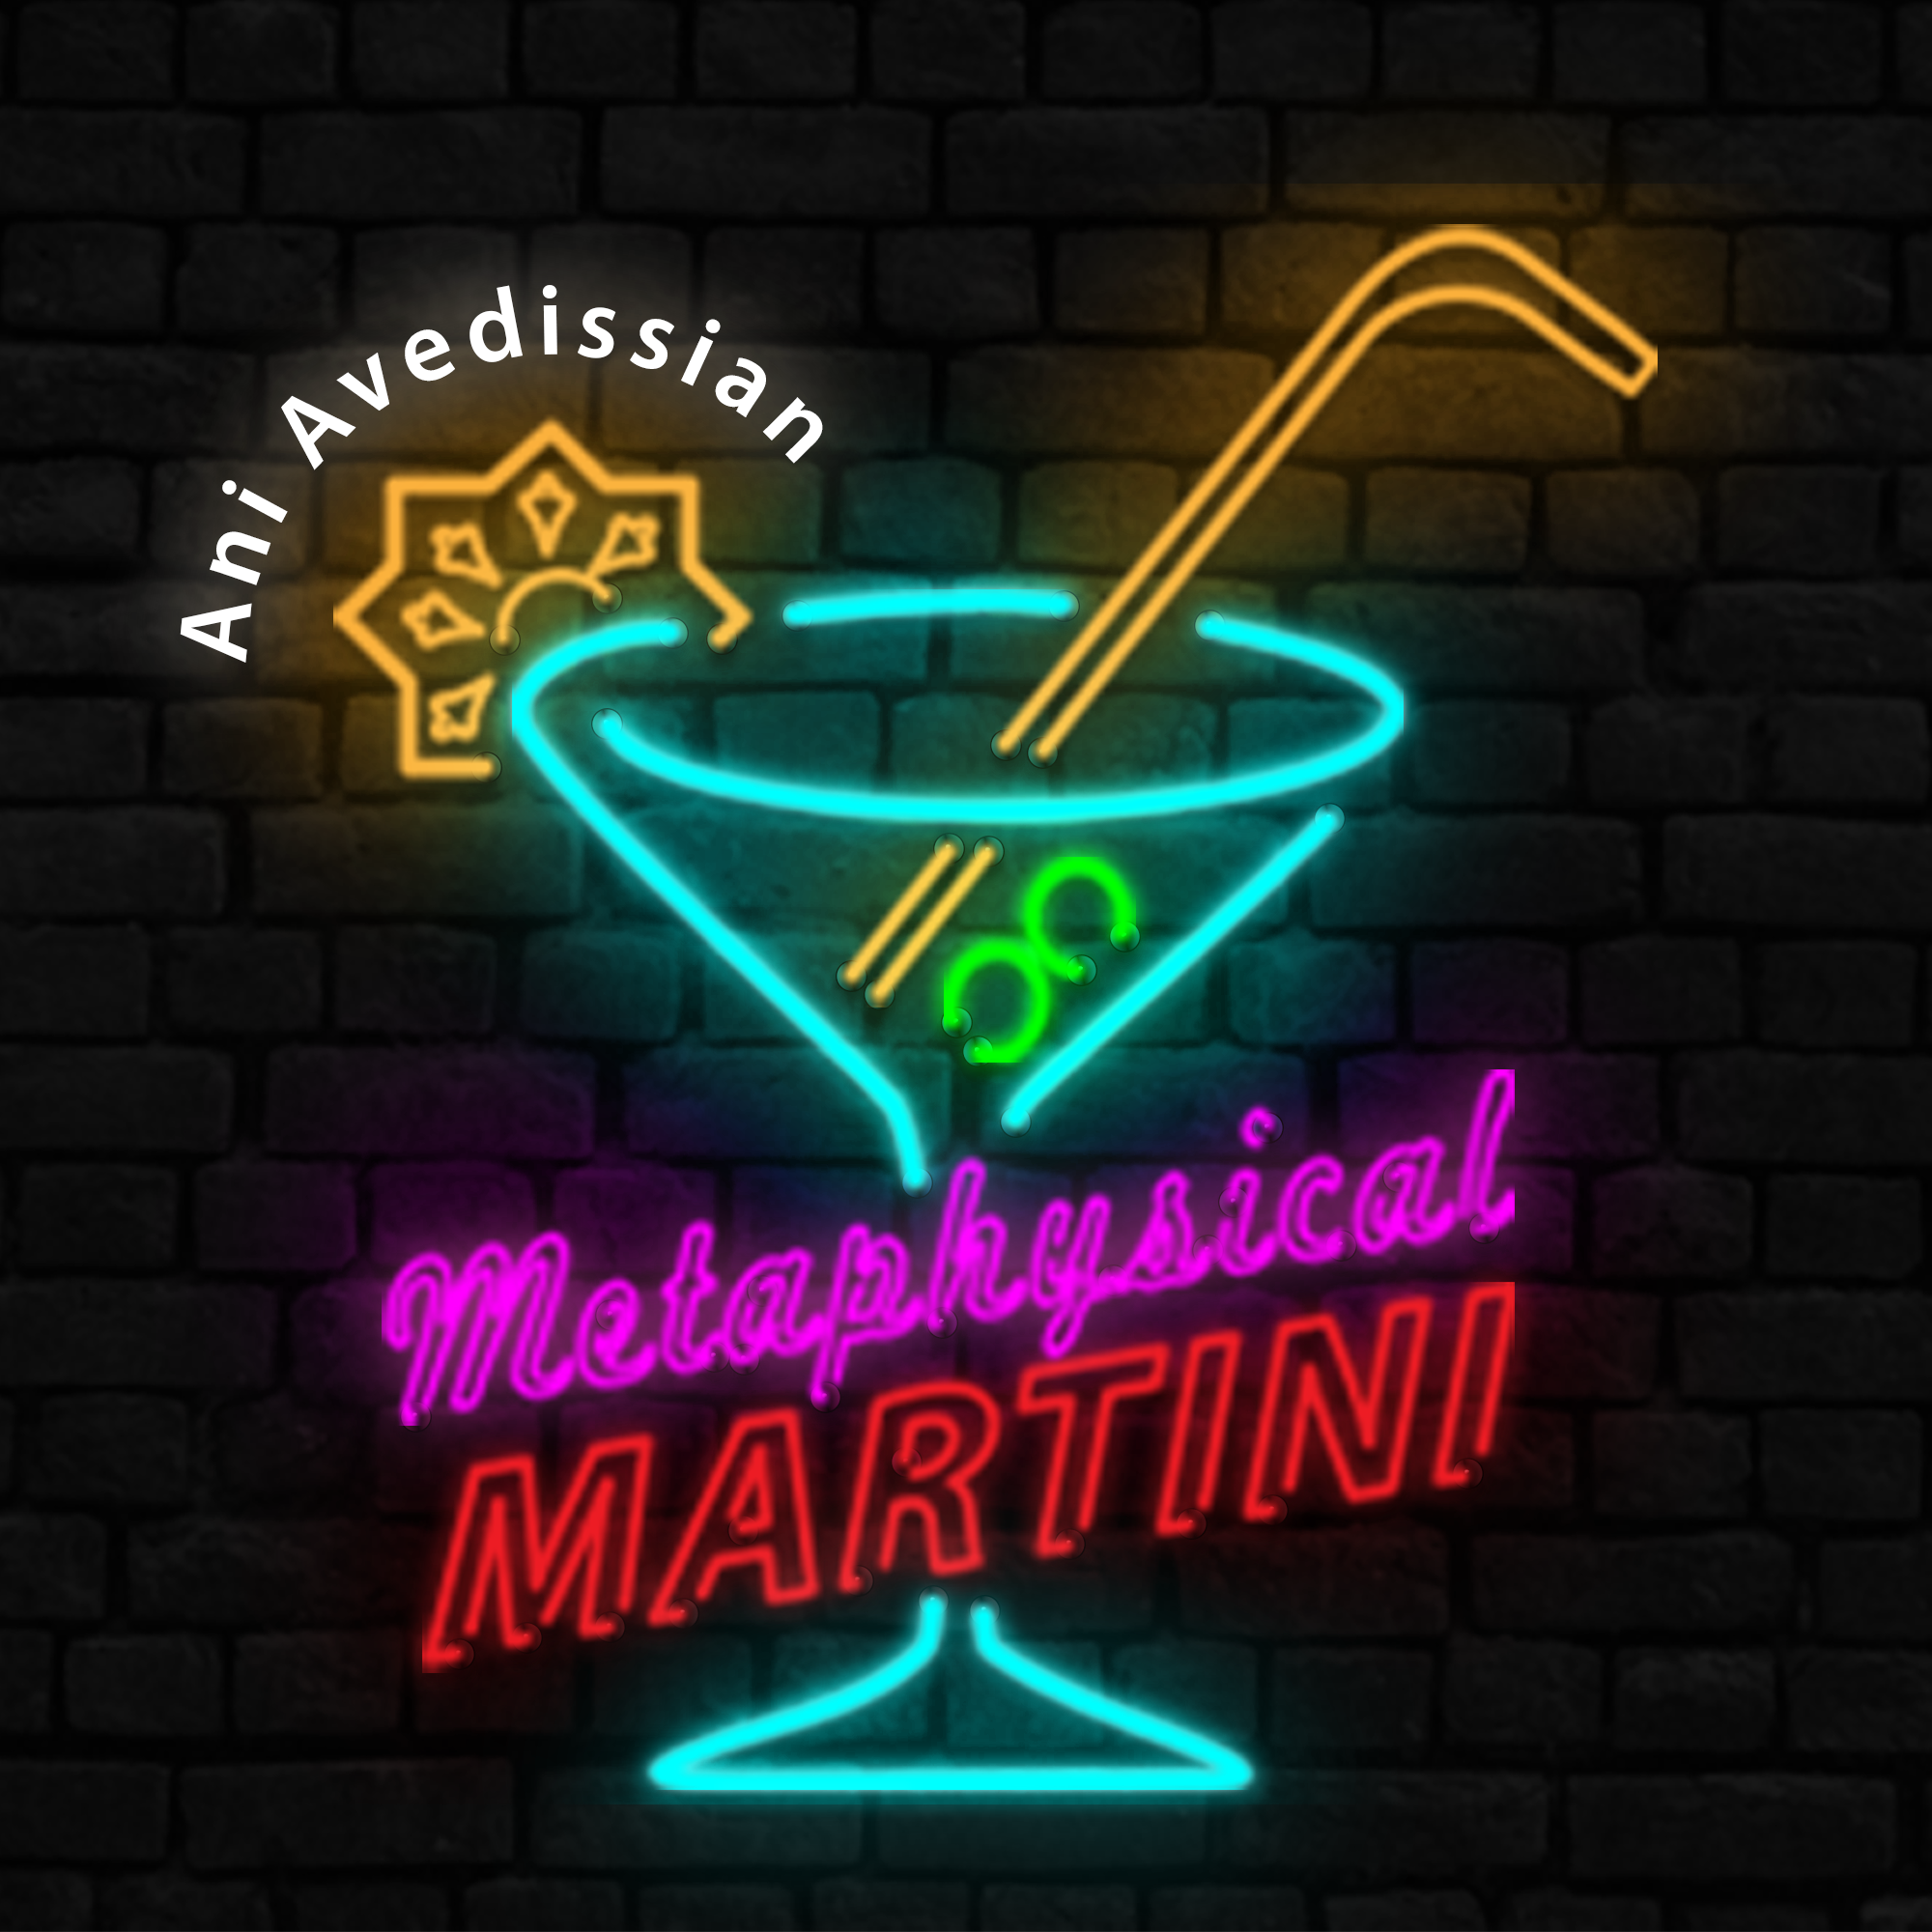 "Metaphysical Martini" 05/12/2021 - The Perfect Martini?  So kind of you to ask!